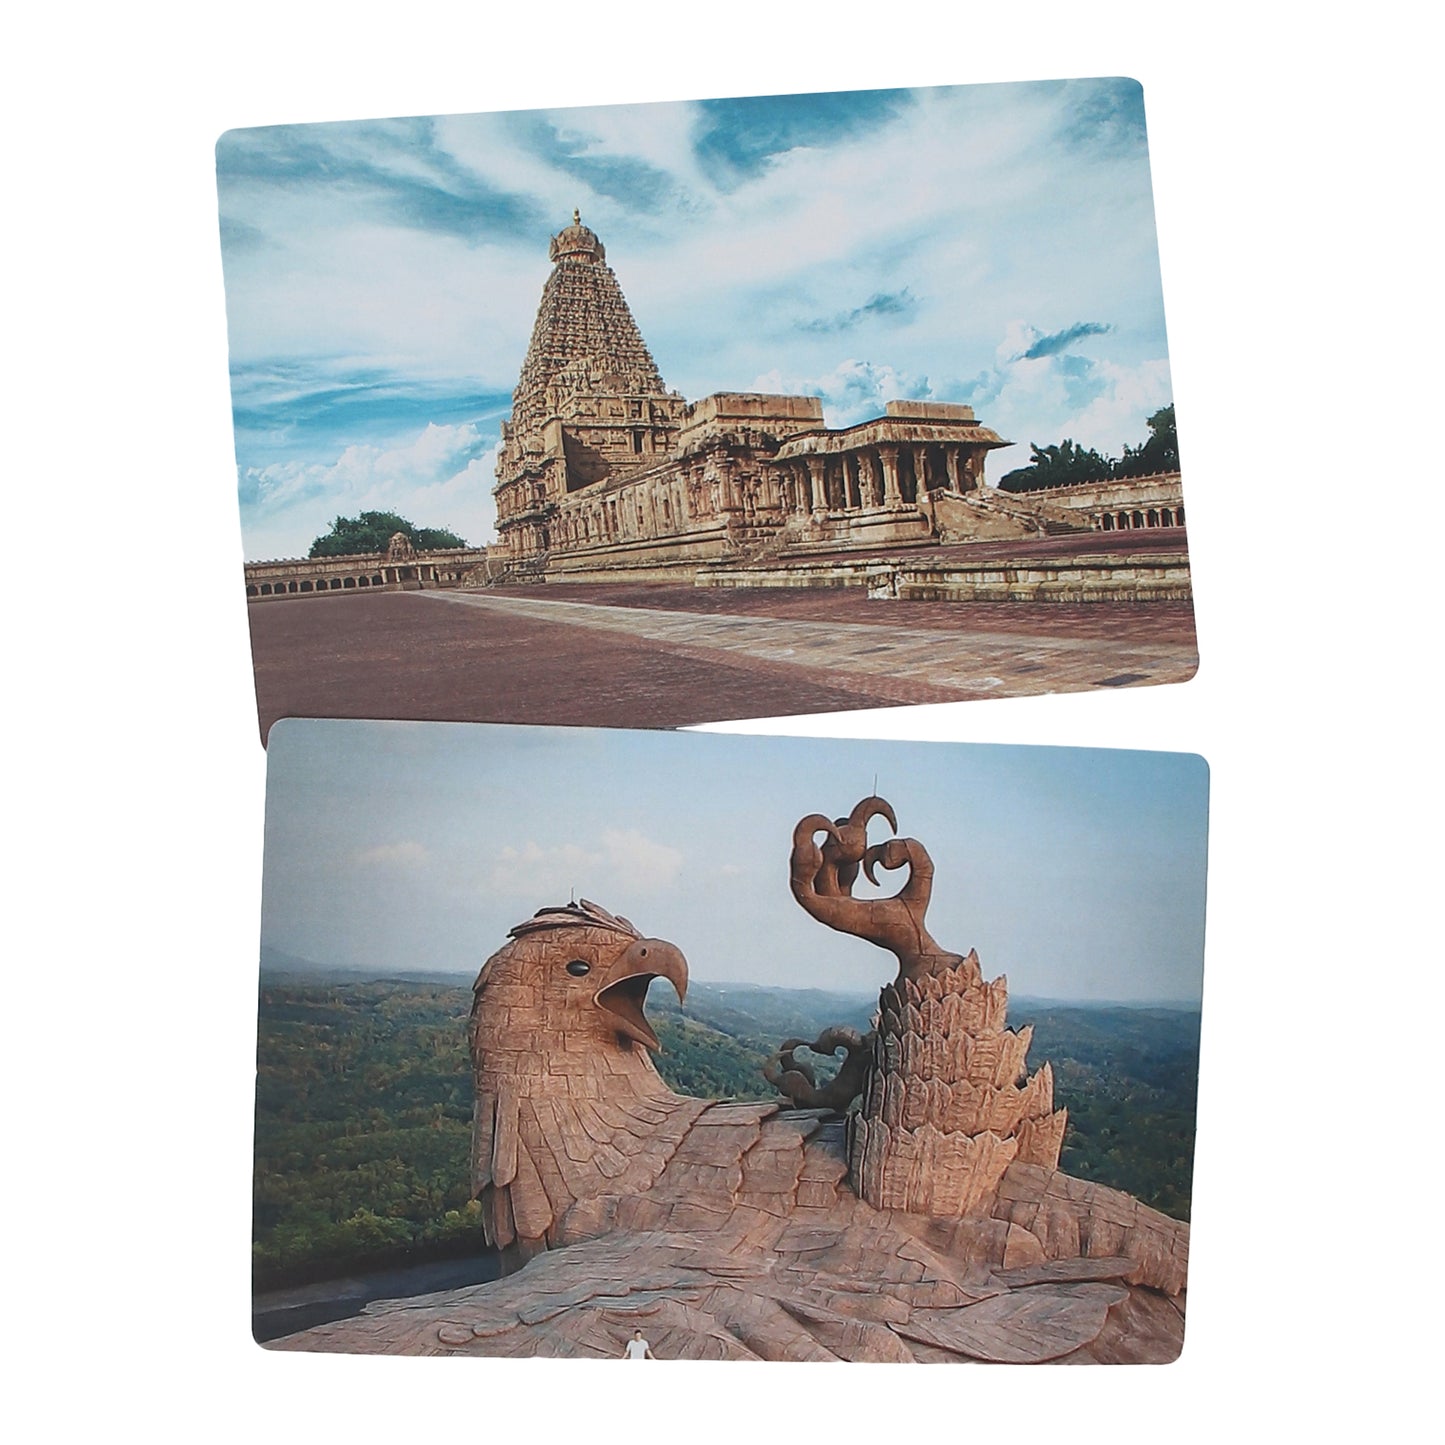 PiK A BOO Monuments of India FlashCard for Kids Toddlers, Pre School, Early Learning